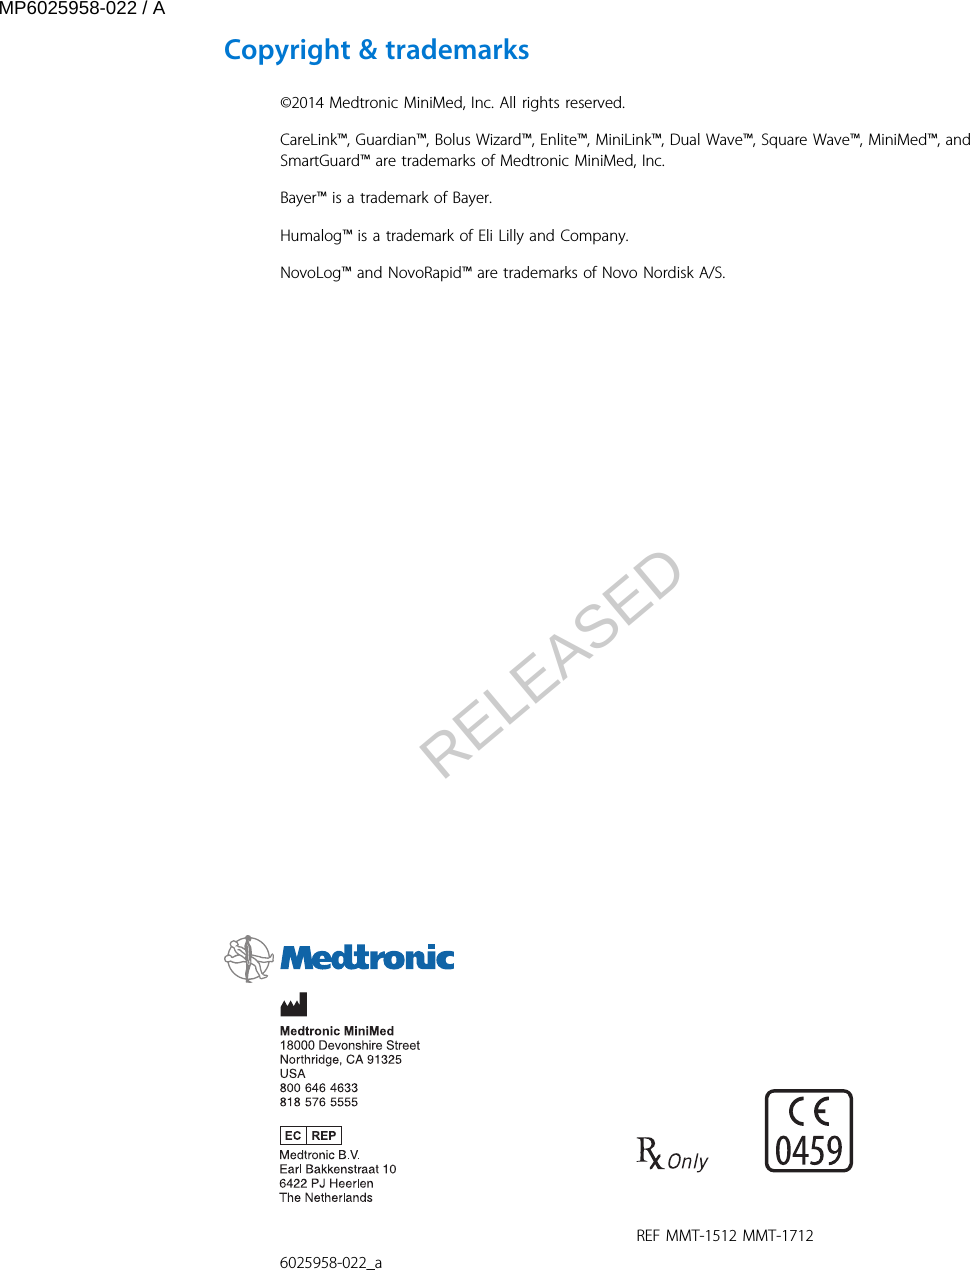 Copyright &amp; trademarks ©2014 Medtronic MiniMed, Inc. All rights reserved.CareLink™, Guardian™, Bolus Wizard™, Enlite™, MiniLink™, Dual Wave™, Square Wave™, MiniMed™, andSmartGuard™ are trademarks of Medtronic MiniMed, Inc.Bayer™ is a trademark of Bayer.Humalog™ is a trademark of Eli Lilly and Company.NovoLog™ and NovoRapid™ are trademarks of Novo Nordisk A/S. 6025958-022_a   REF MMT-1512 MMT-1712MP6025958-022 / ARELEASED